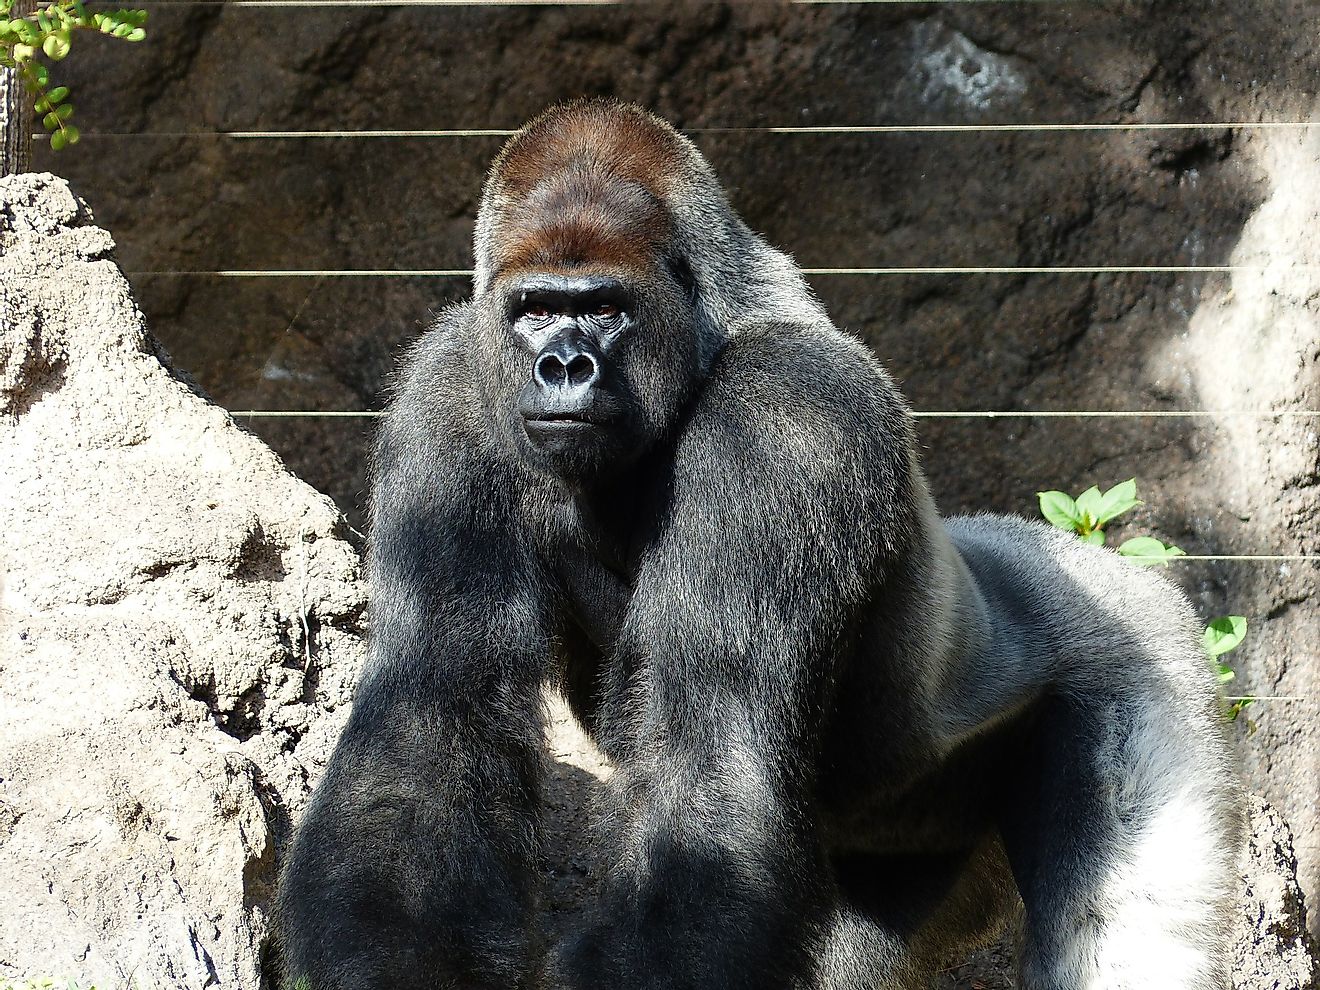 The mountain gorilla has been considered endangered by the International Union for Conservation of Nature (IUCN) since 2018. Image by Hans Braxmeier from Pixabay 